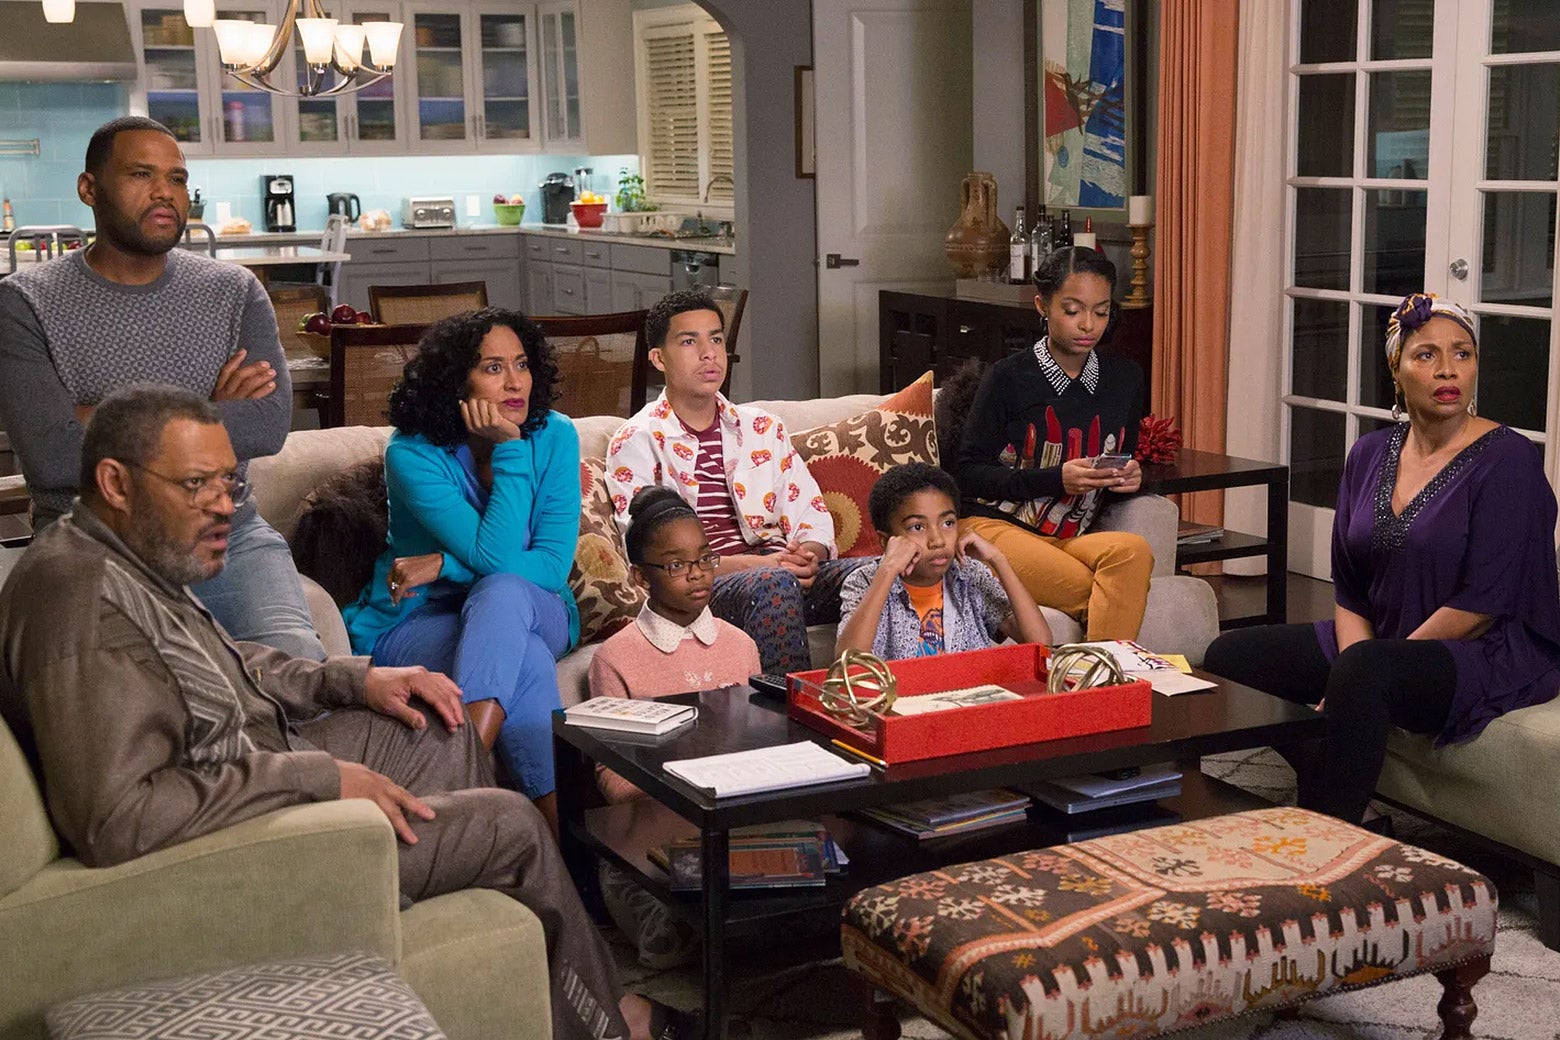 Eight members of a family sit in their living room and watch TV. They look horrified.